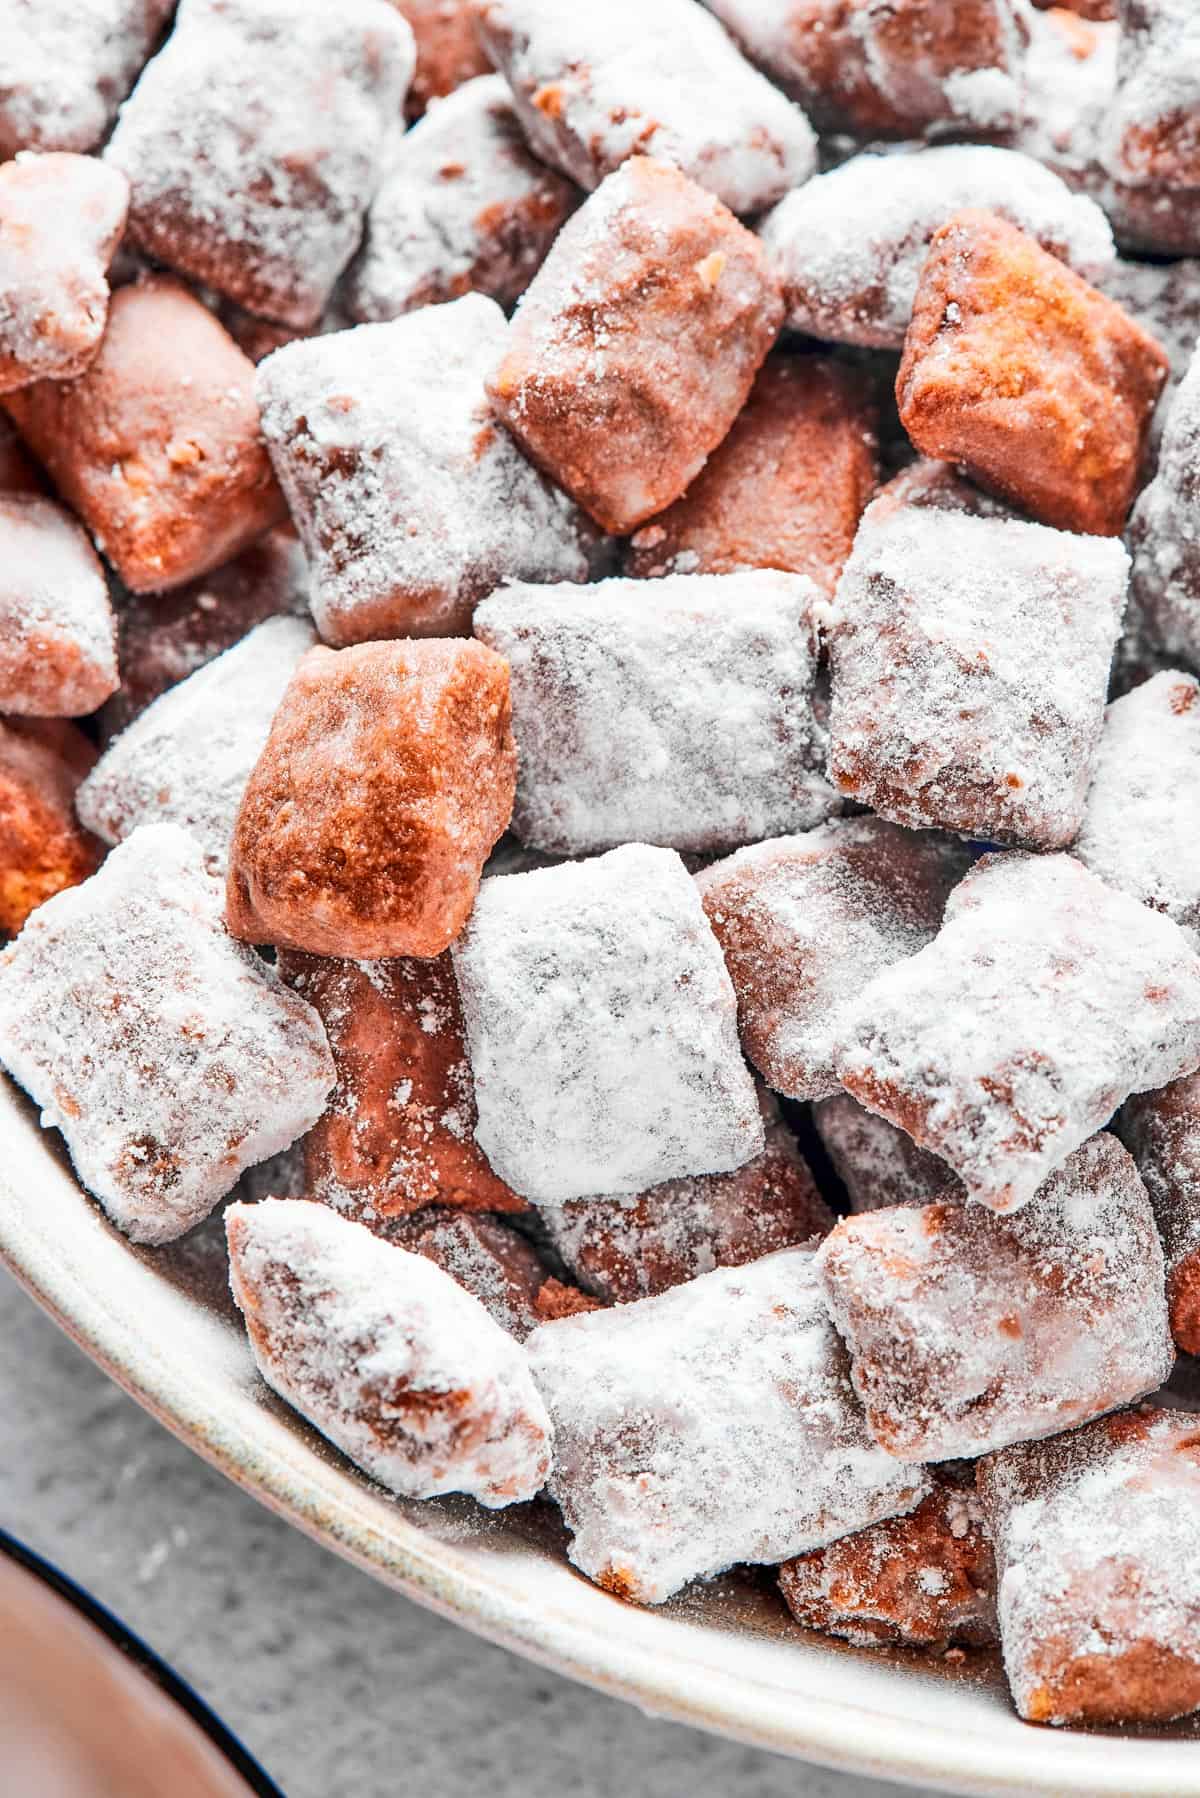 Close-up shot of puppy chow in a white bowl, to show the texture. Some pieces are fully coated in powdered sugar, while others are not.